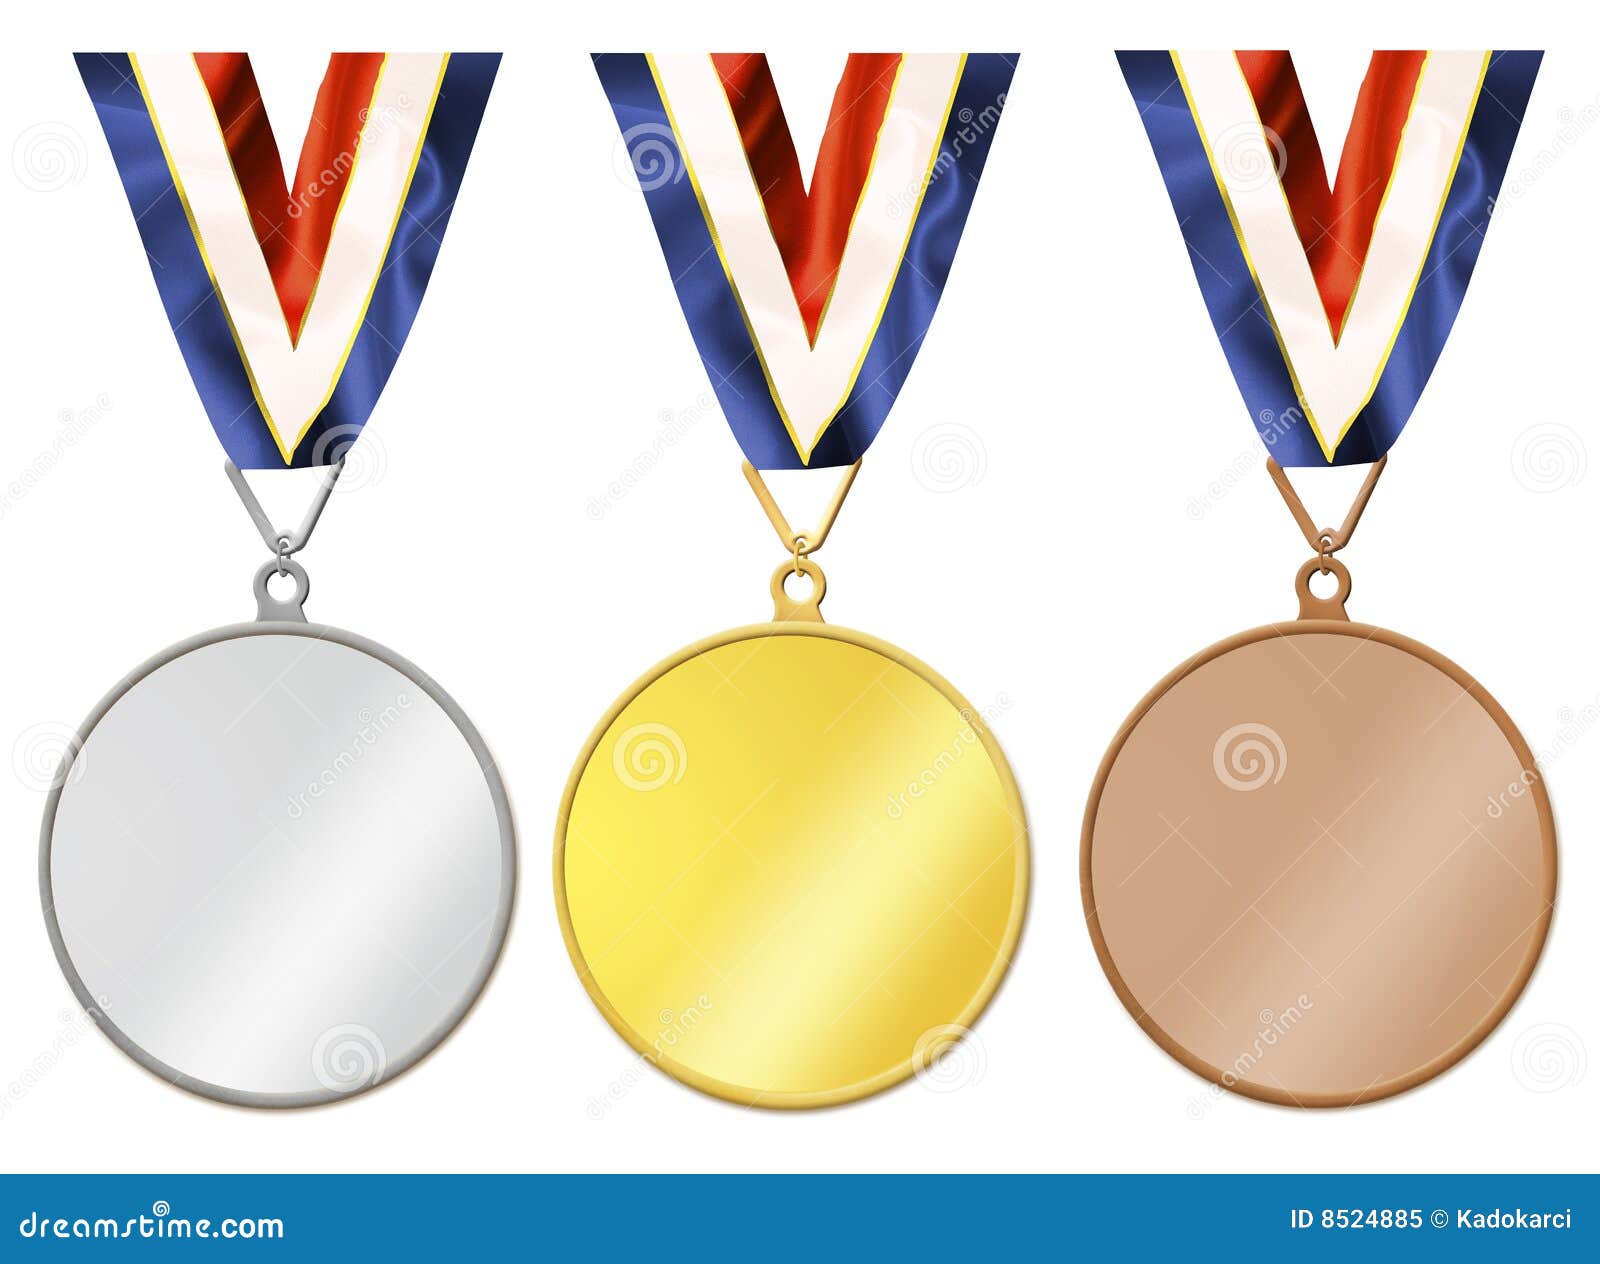 clipart pictures of olympic medals - photo #31